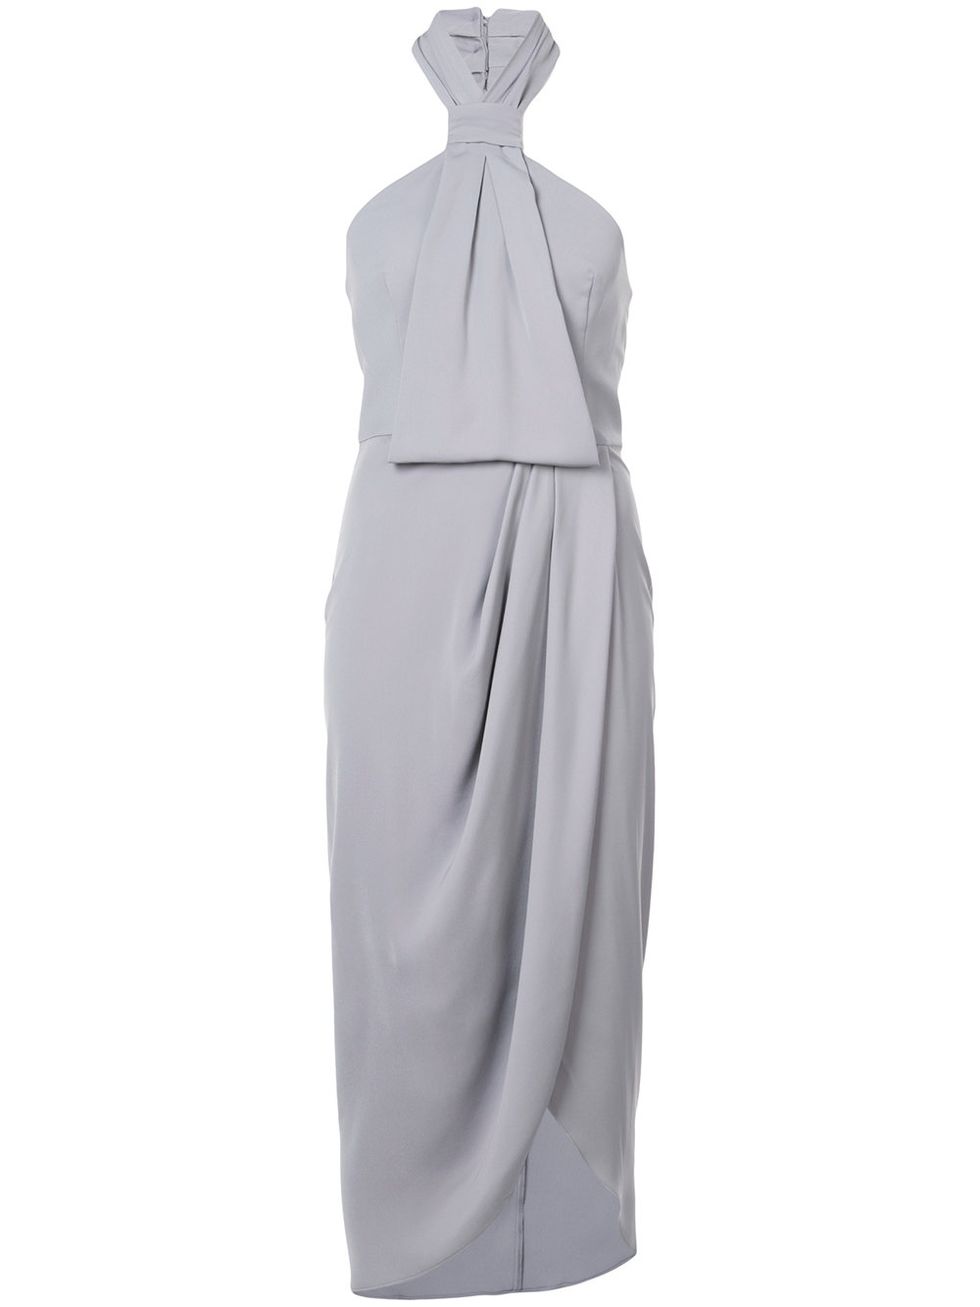 Clothing, Dress, White, Day dress, Shoulder, Sleeve, Cocktail dress, Formal wear, Gown, Neck, 